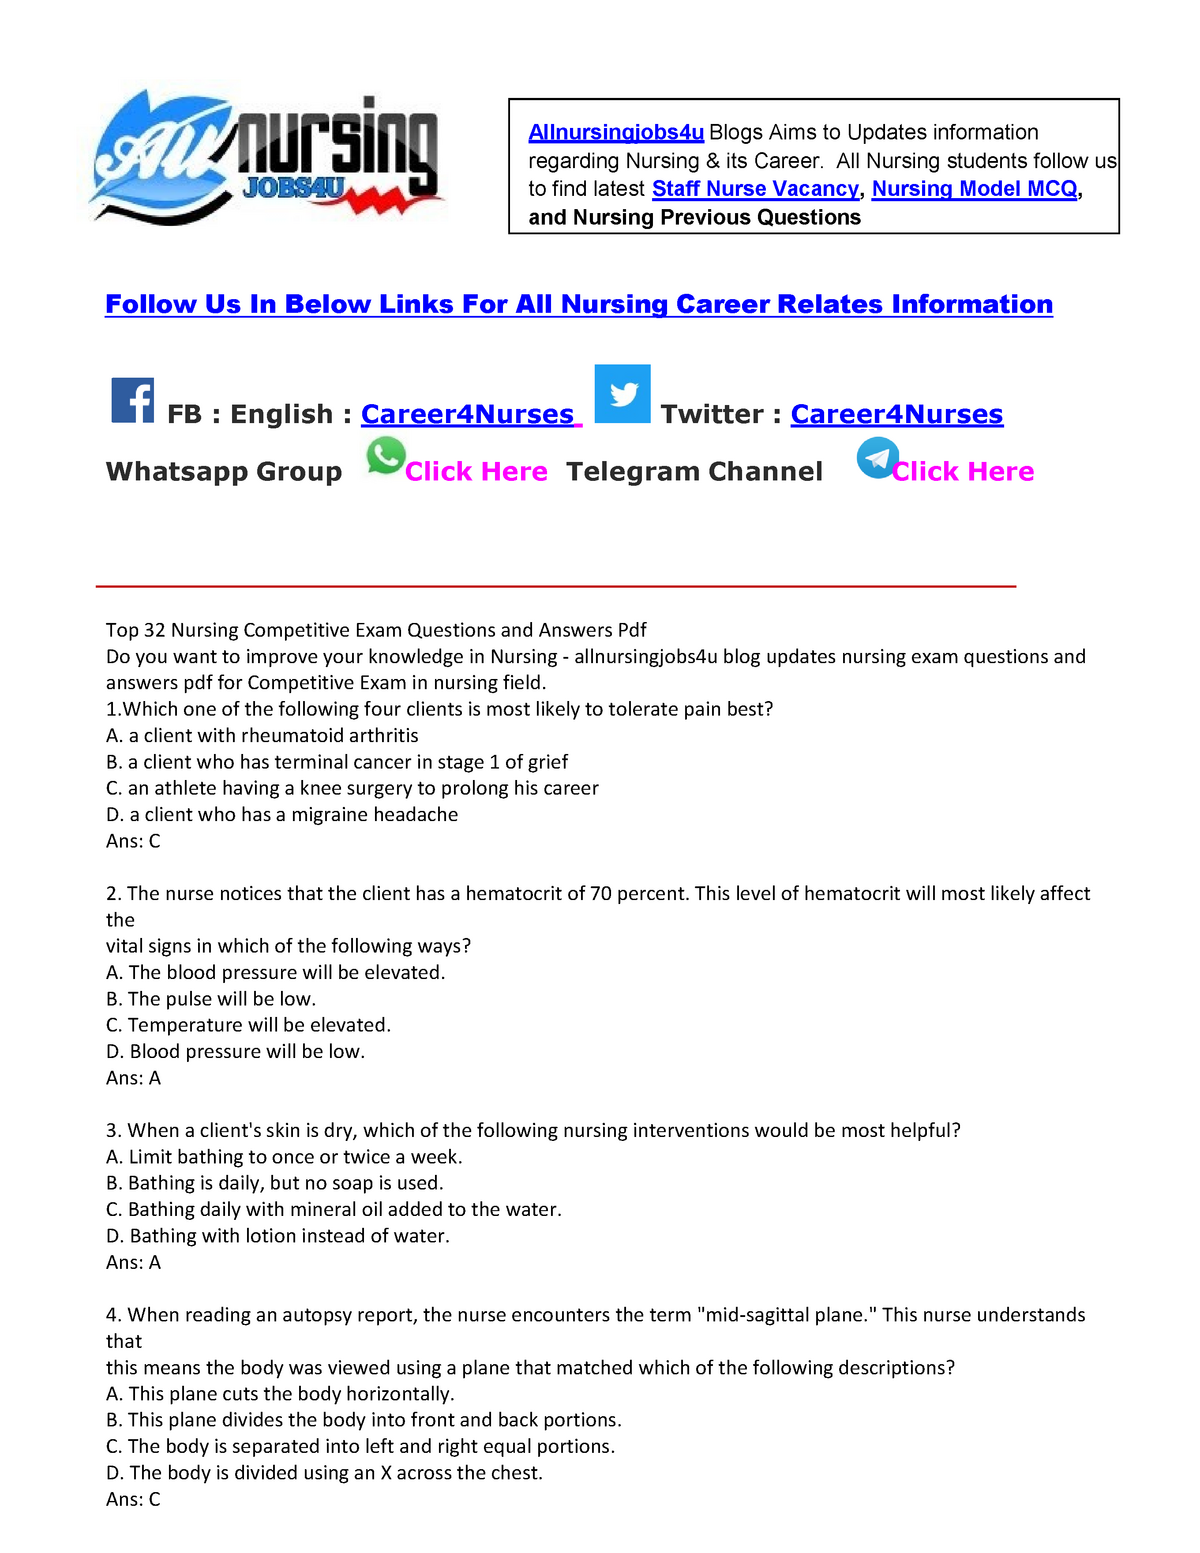 research questions and answers pdf